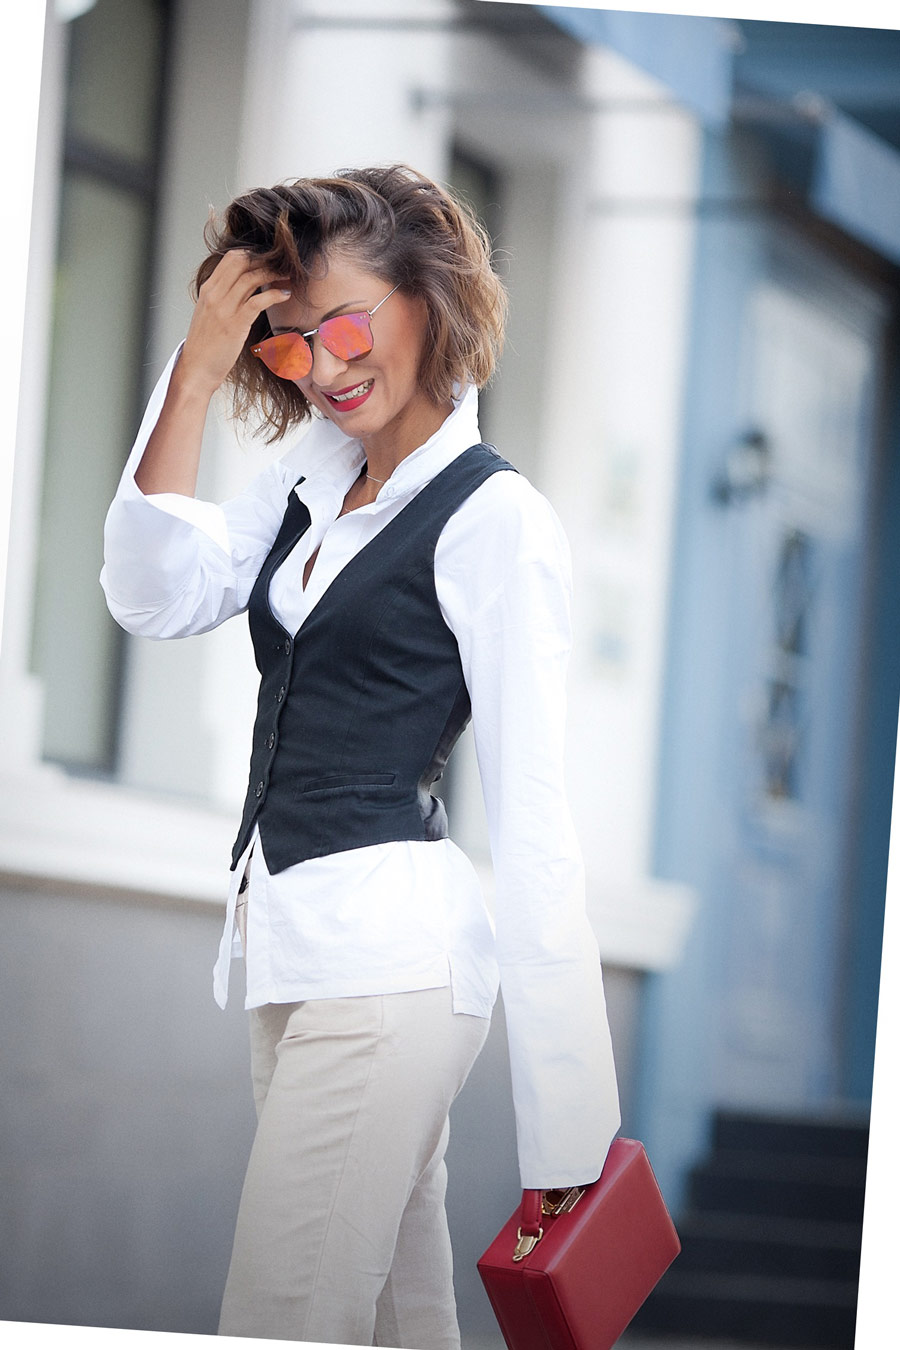 white shirt outfit, suit waistcoat outfit, 